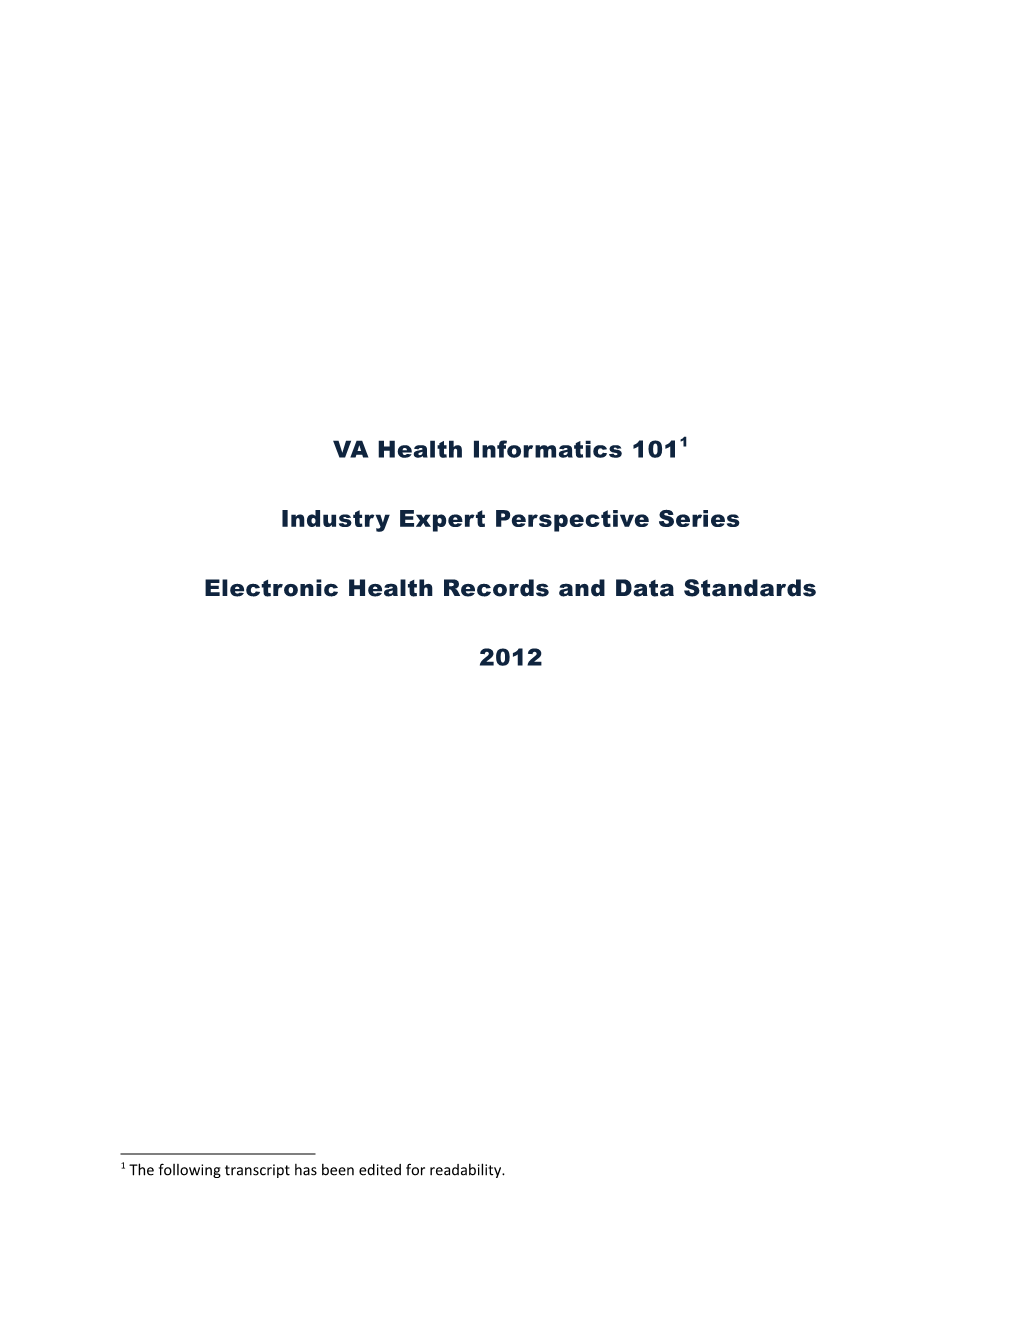 Electronic Health Records and Data Standards2012